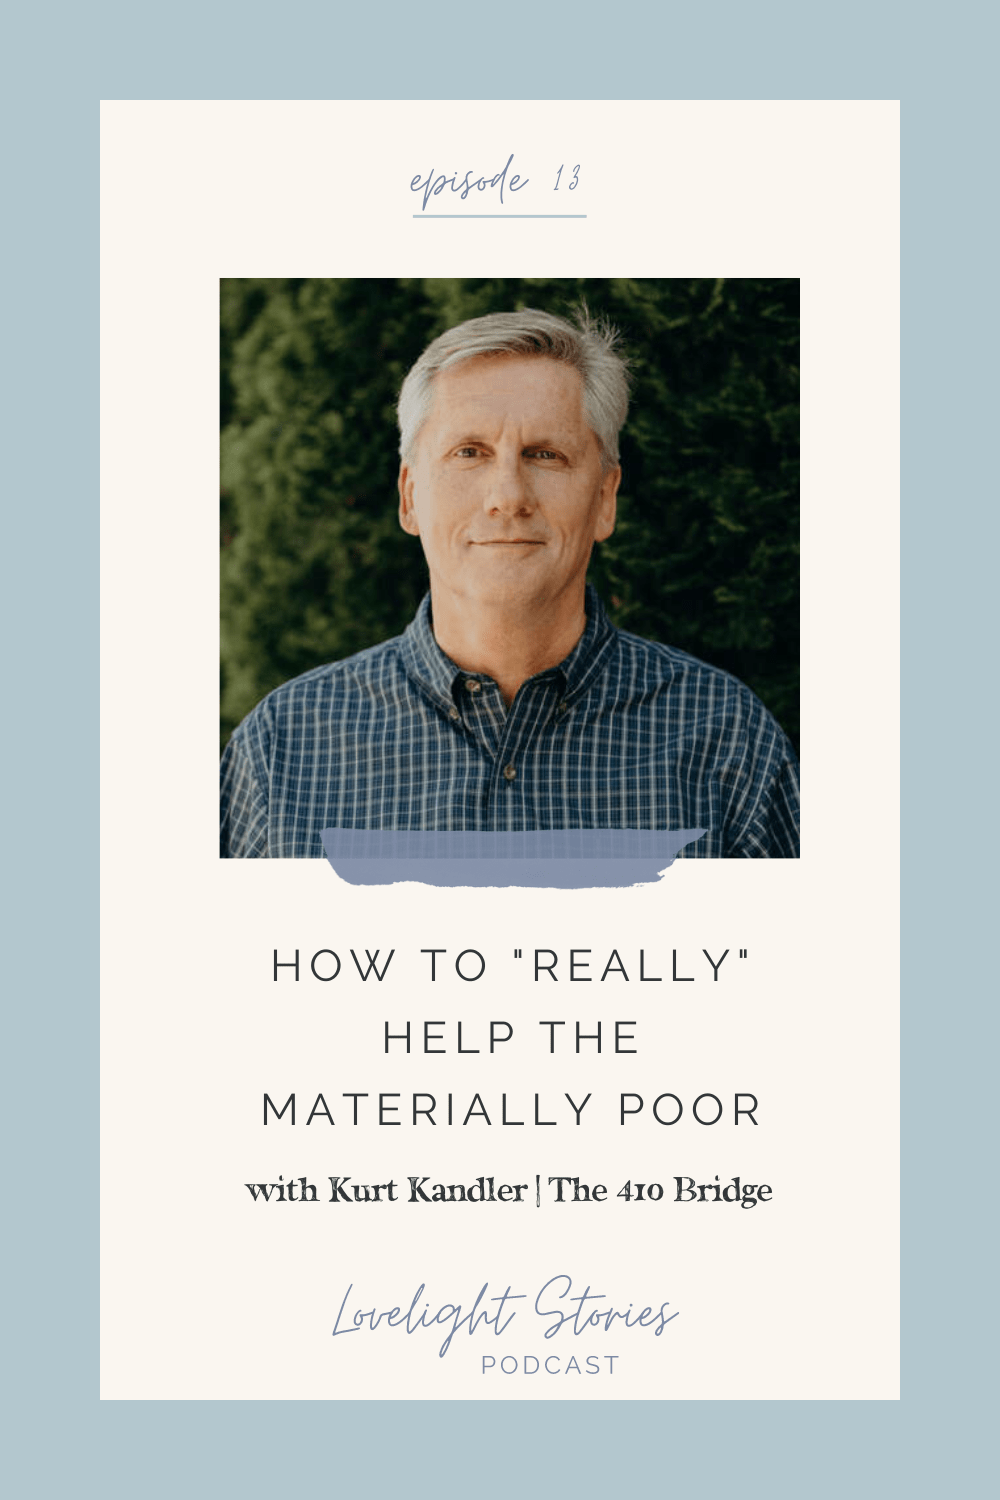 The Lovelight Stories Podcast_How to Really Help the Materially Poor with Kurt Kandler | The 410 Bridge